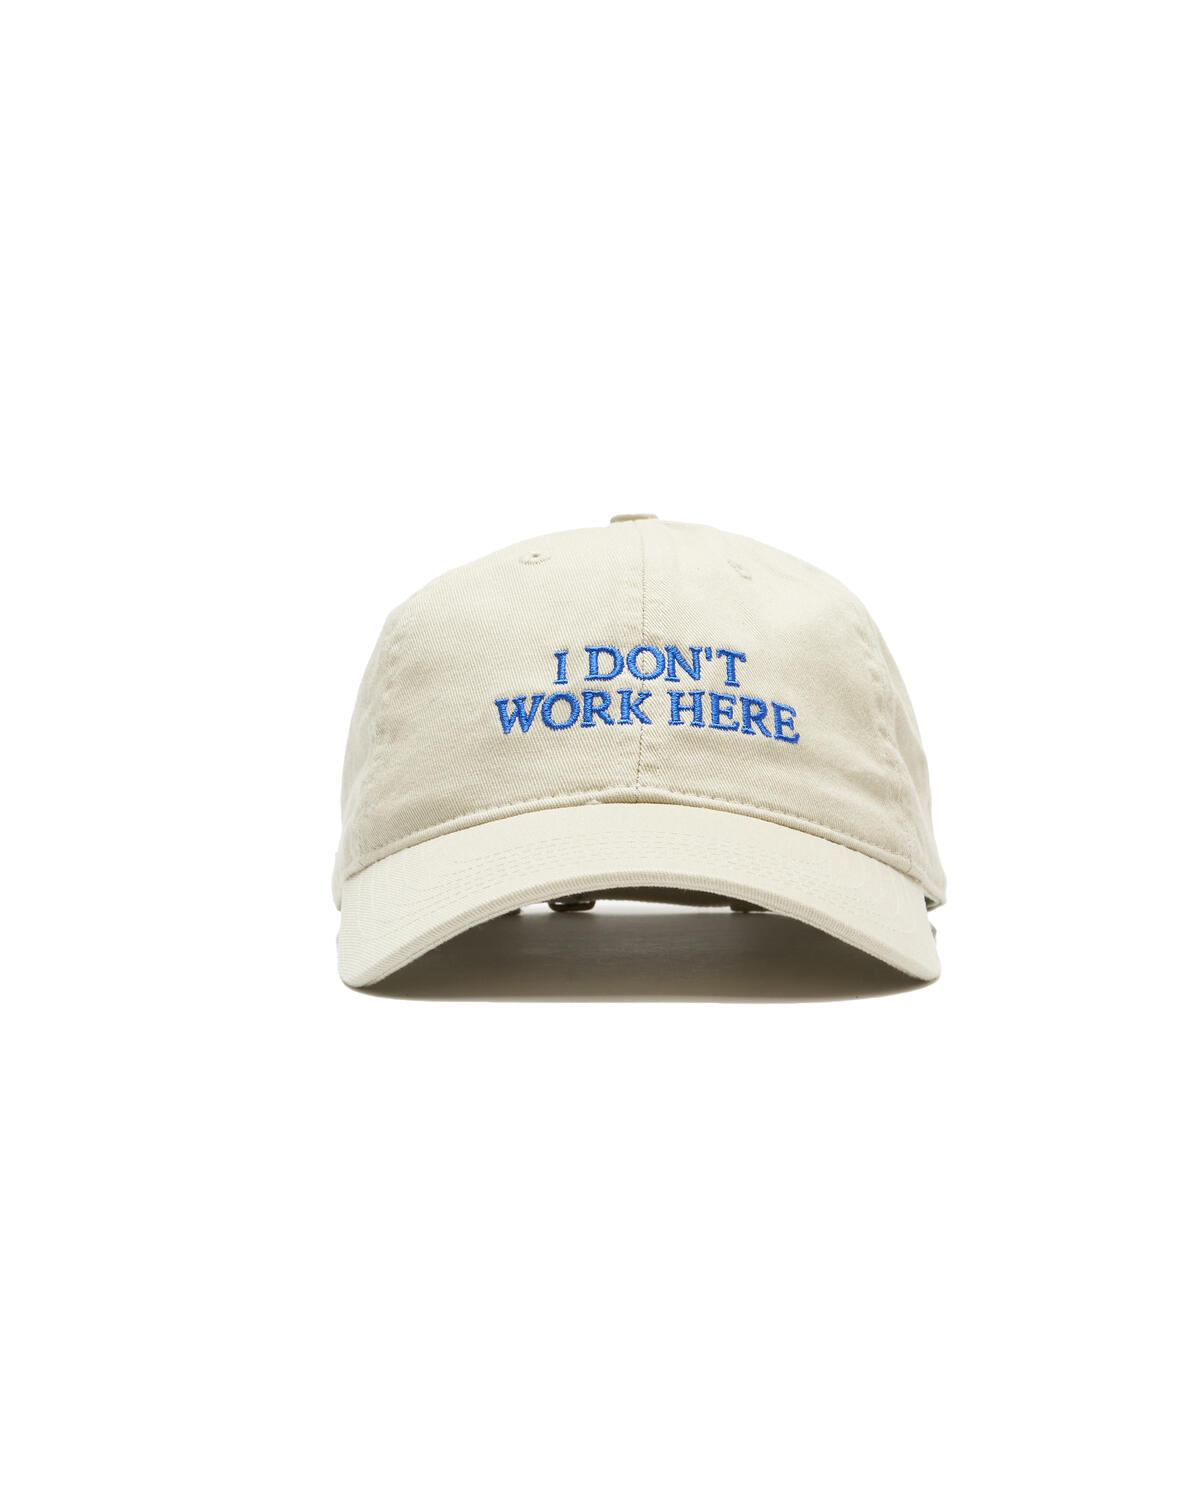 IDEA SORRY I DON'T WORK HERE HAT | SIDWHH-BHBE | AFEW